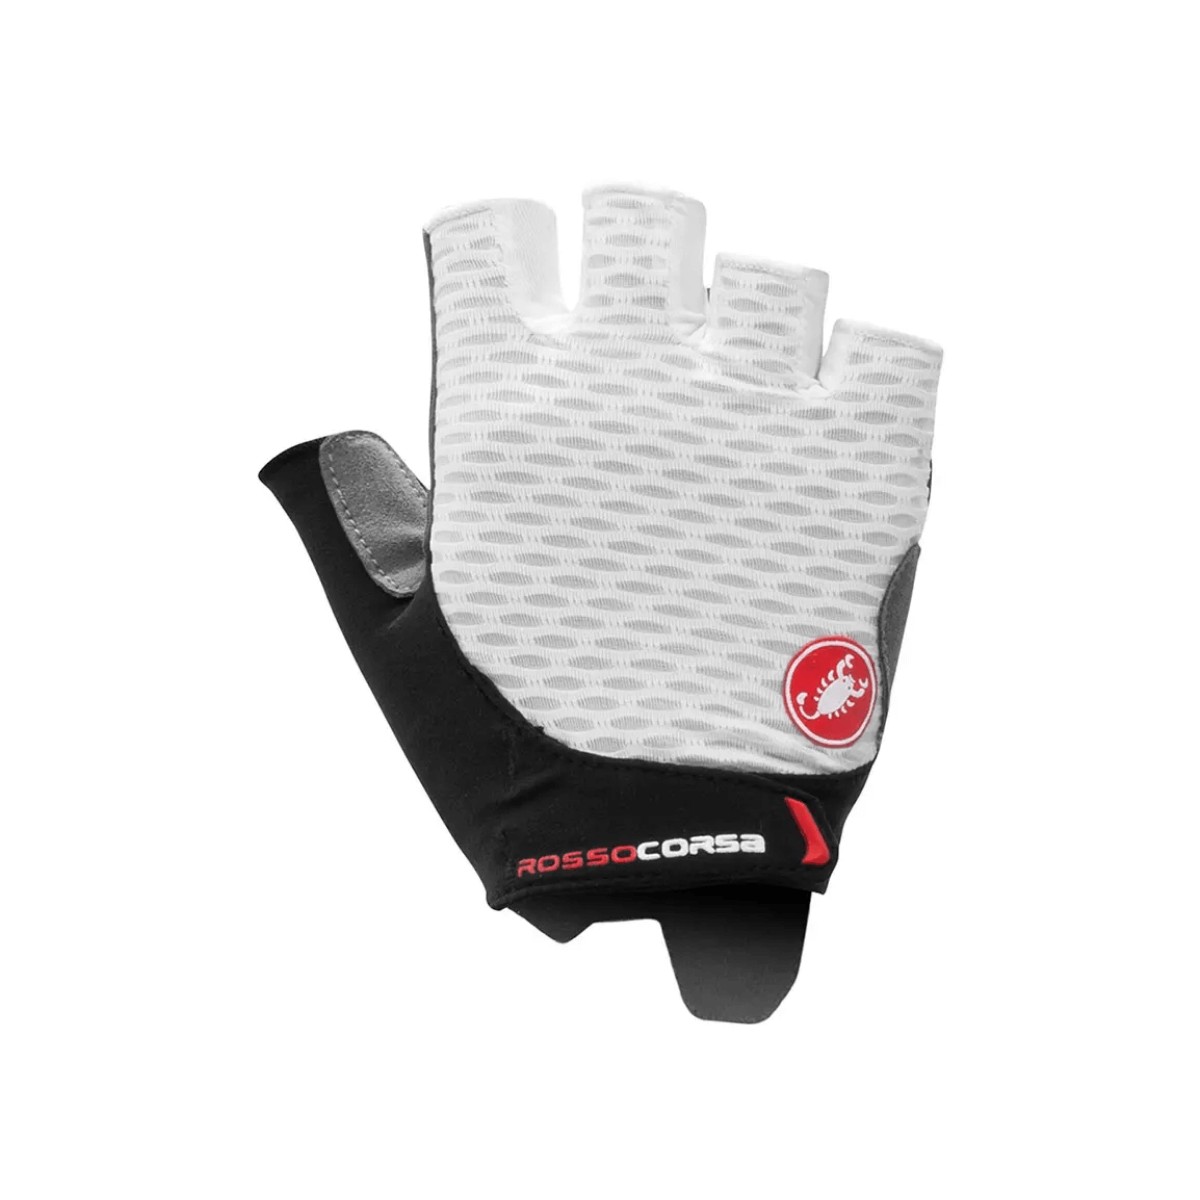 Photos - Cycling Gloves Castelli Rosso Corsa 2 Gloves White Black Women, Size S 4521061001-S 